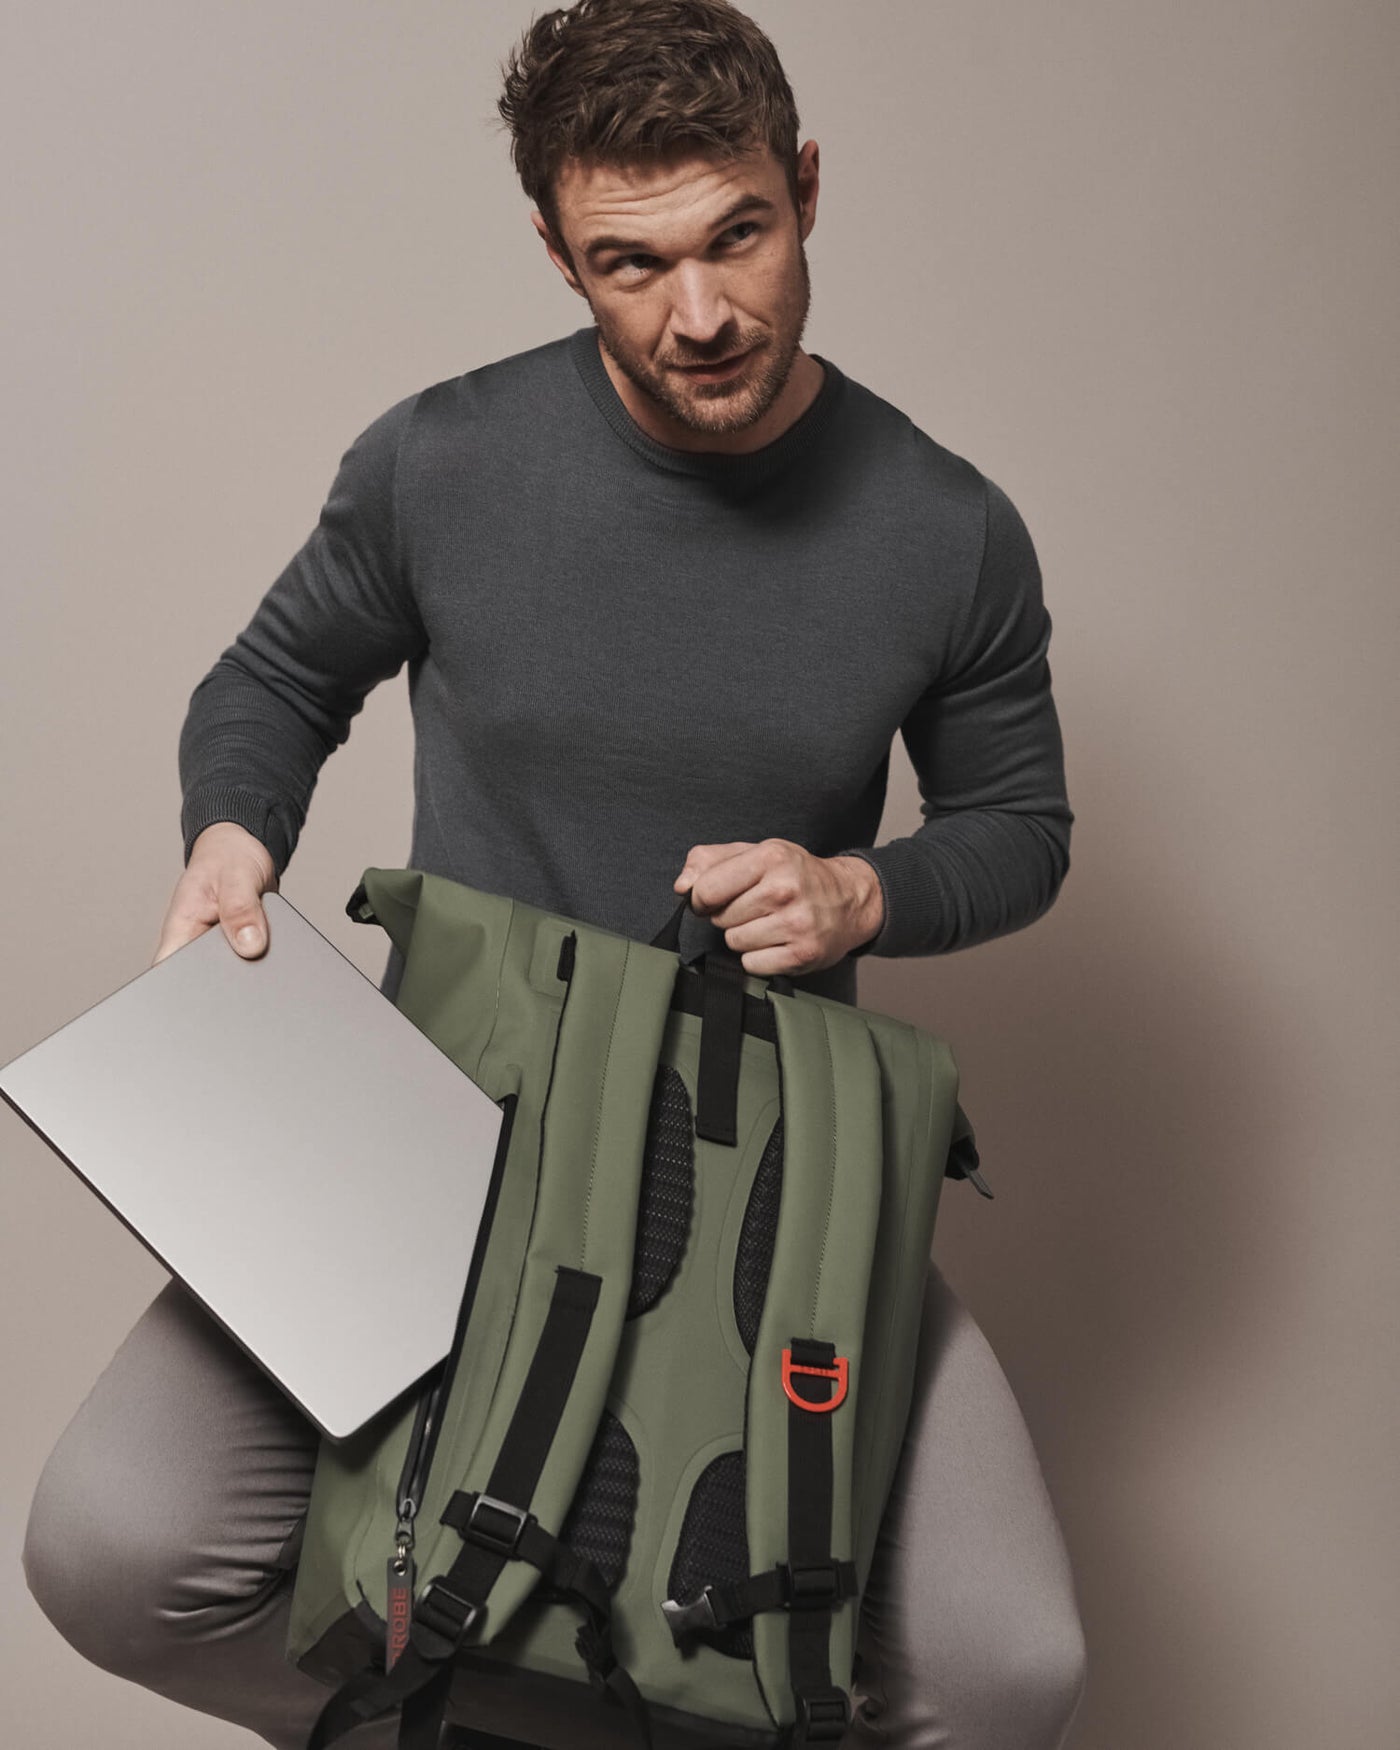 Our moss green roll-top rucksack features an added laptop compartment and front pocket allowing easy organising for your daily commute.